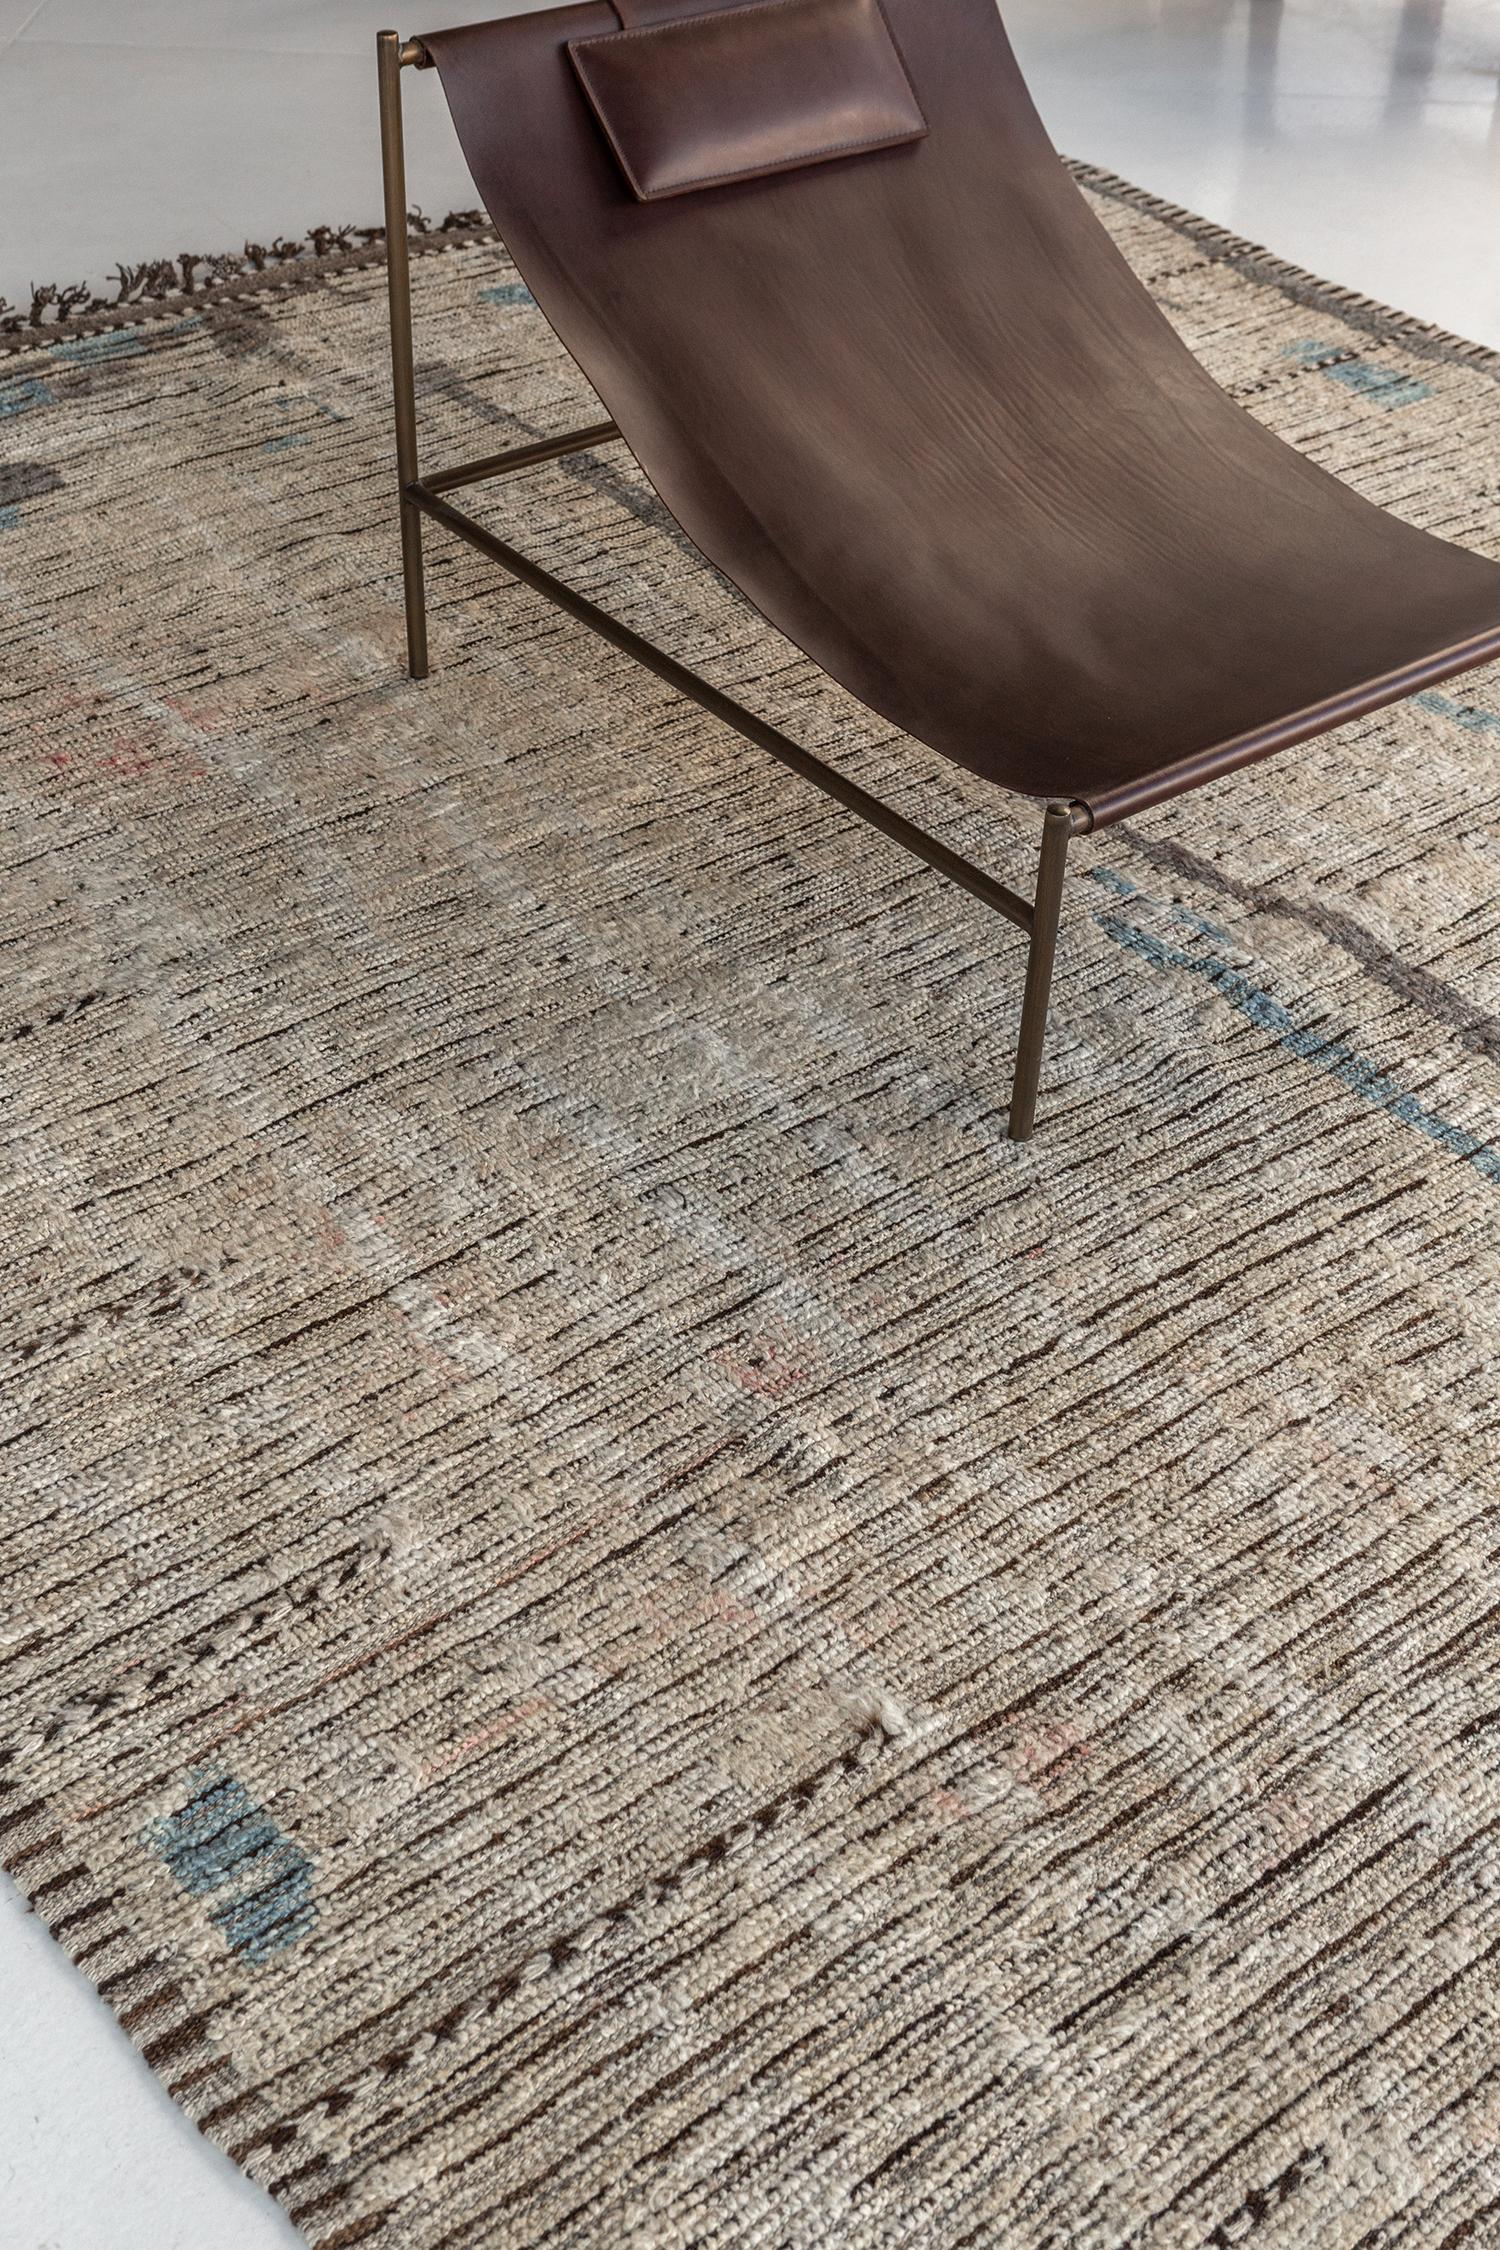 Berberis is an interplay between neutral tones and soothing muted colors into a modern-day interpretation of the Moroccan world. This rug's play of textures, line work, and unique shapes is what makes the Atlas collection so unique and sought after.